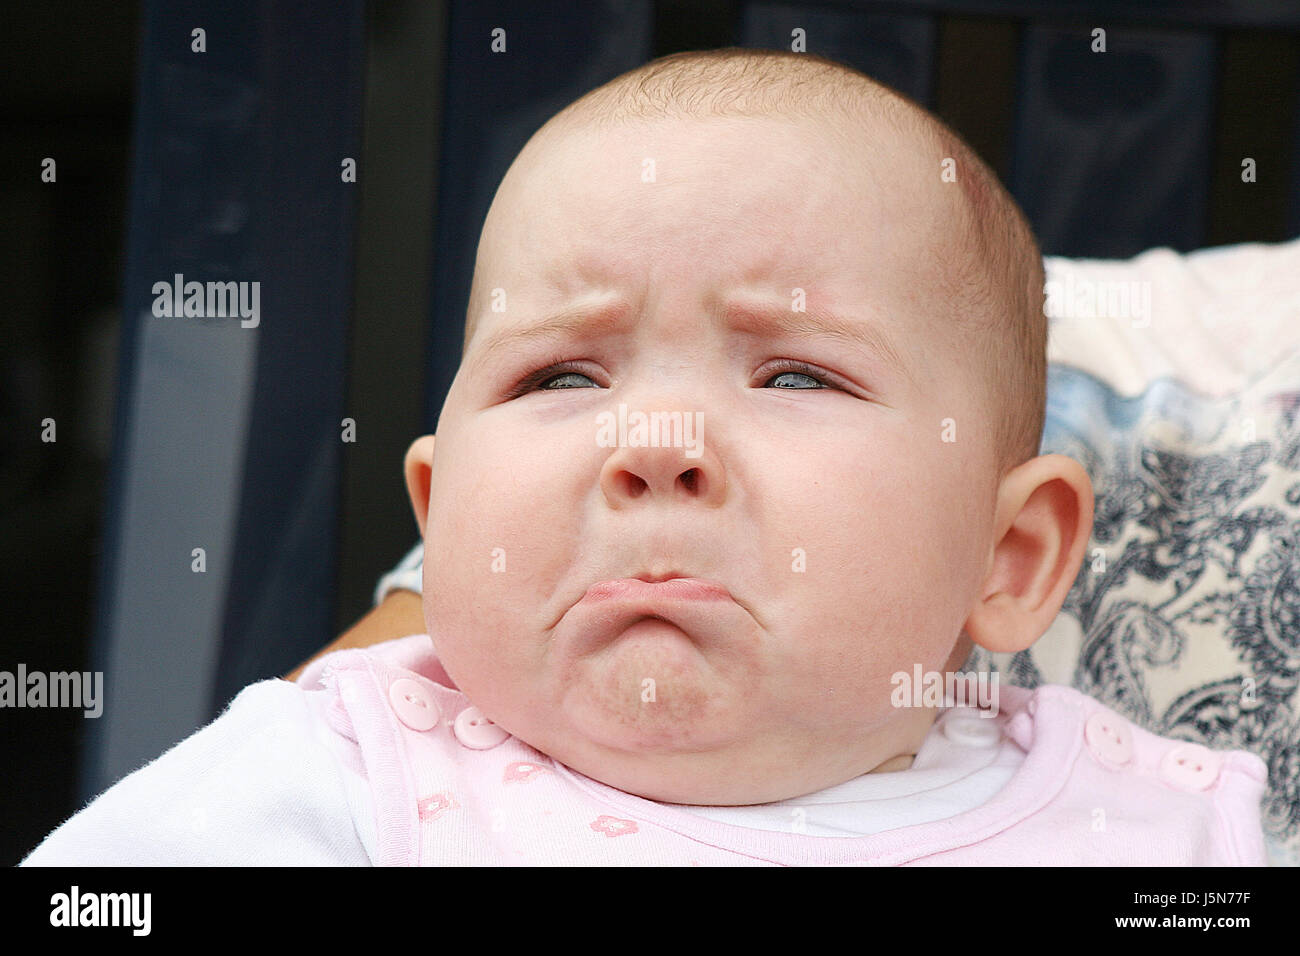 sad baby unhappy weep cry crying weeper weeping indisposition child girl girls Stock Photo